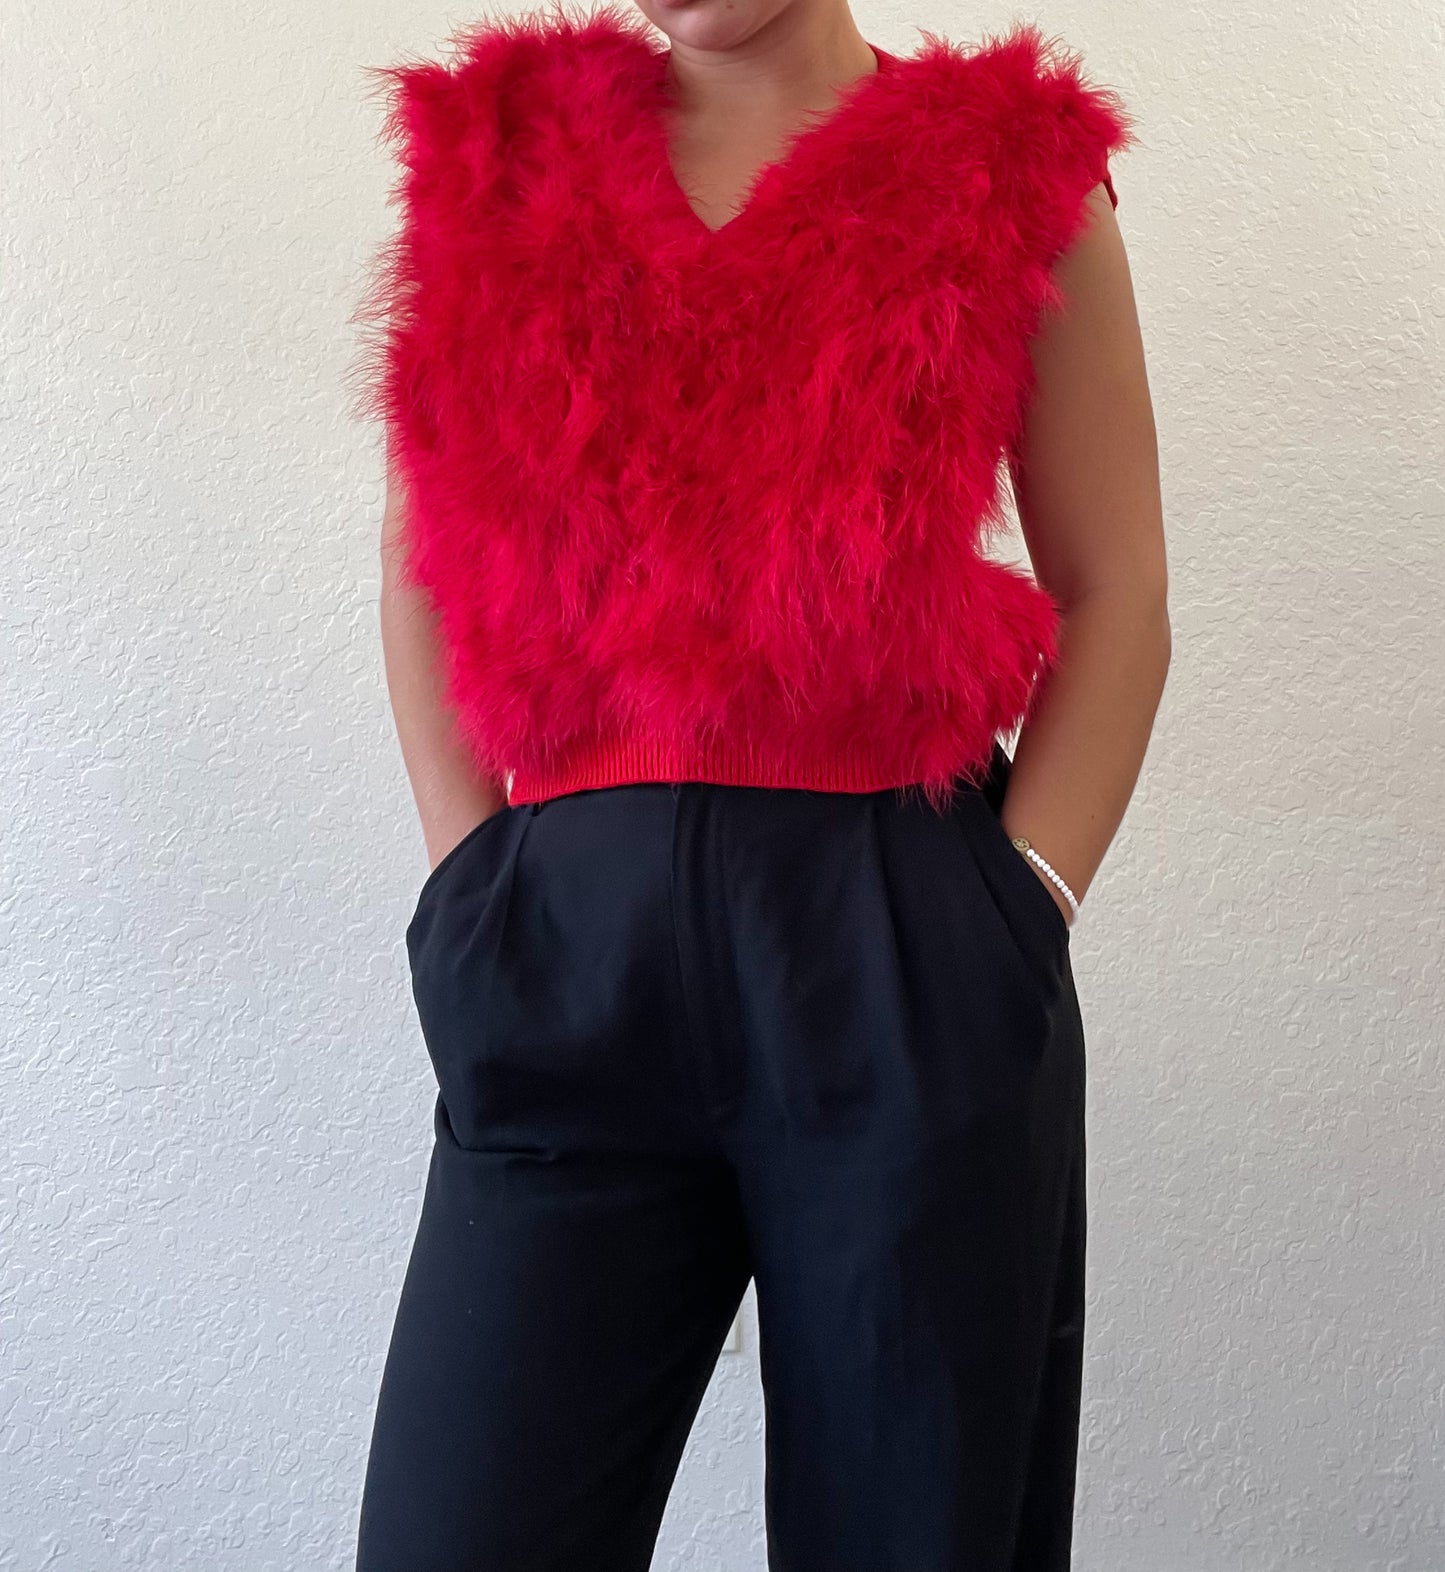 Red feather vest